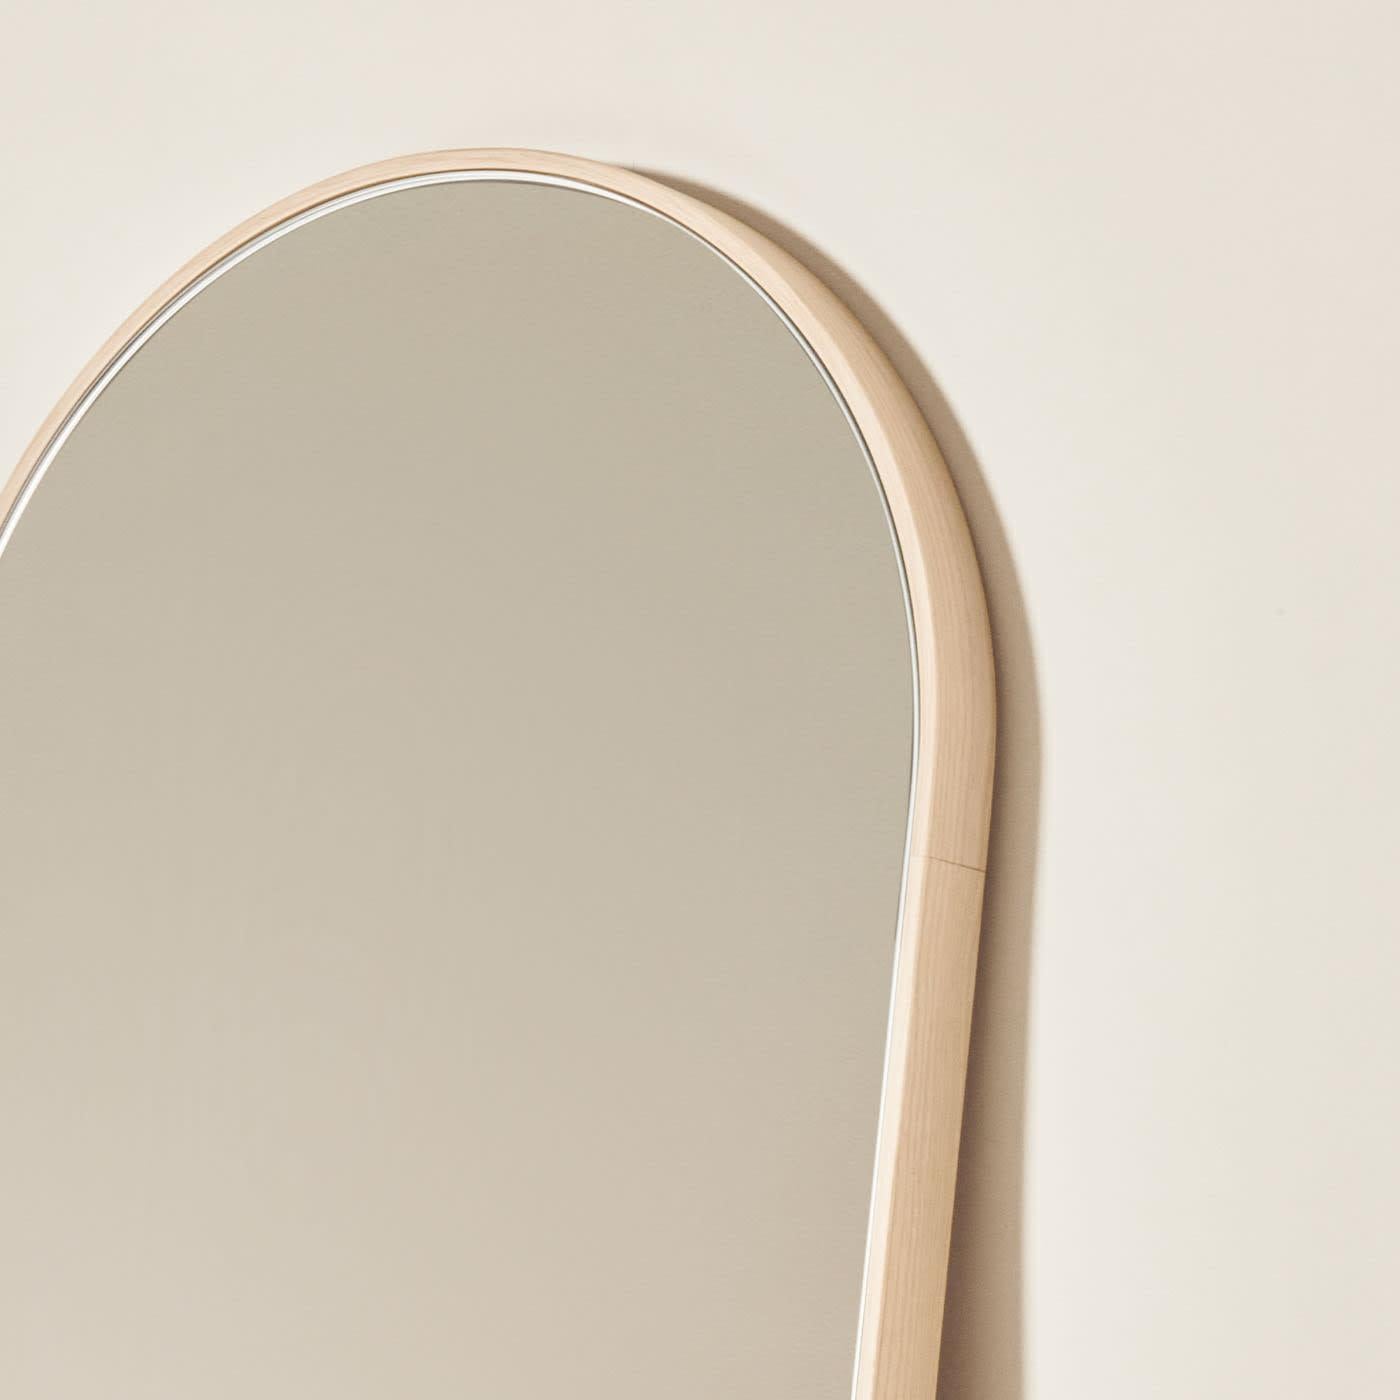 Tutto Sesto mirrors are part of the 2023 collection of contemporary solid wood furniture. Born from the dialogue between Dale Italia and Cono Studio, the range is defined by essential aesthetics, in tune with current trends without losing touch with